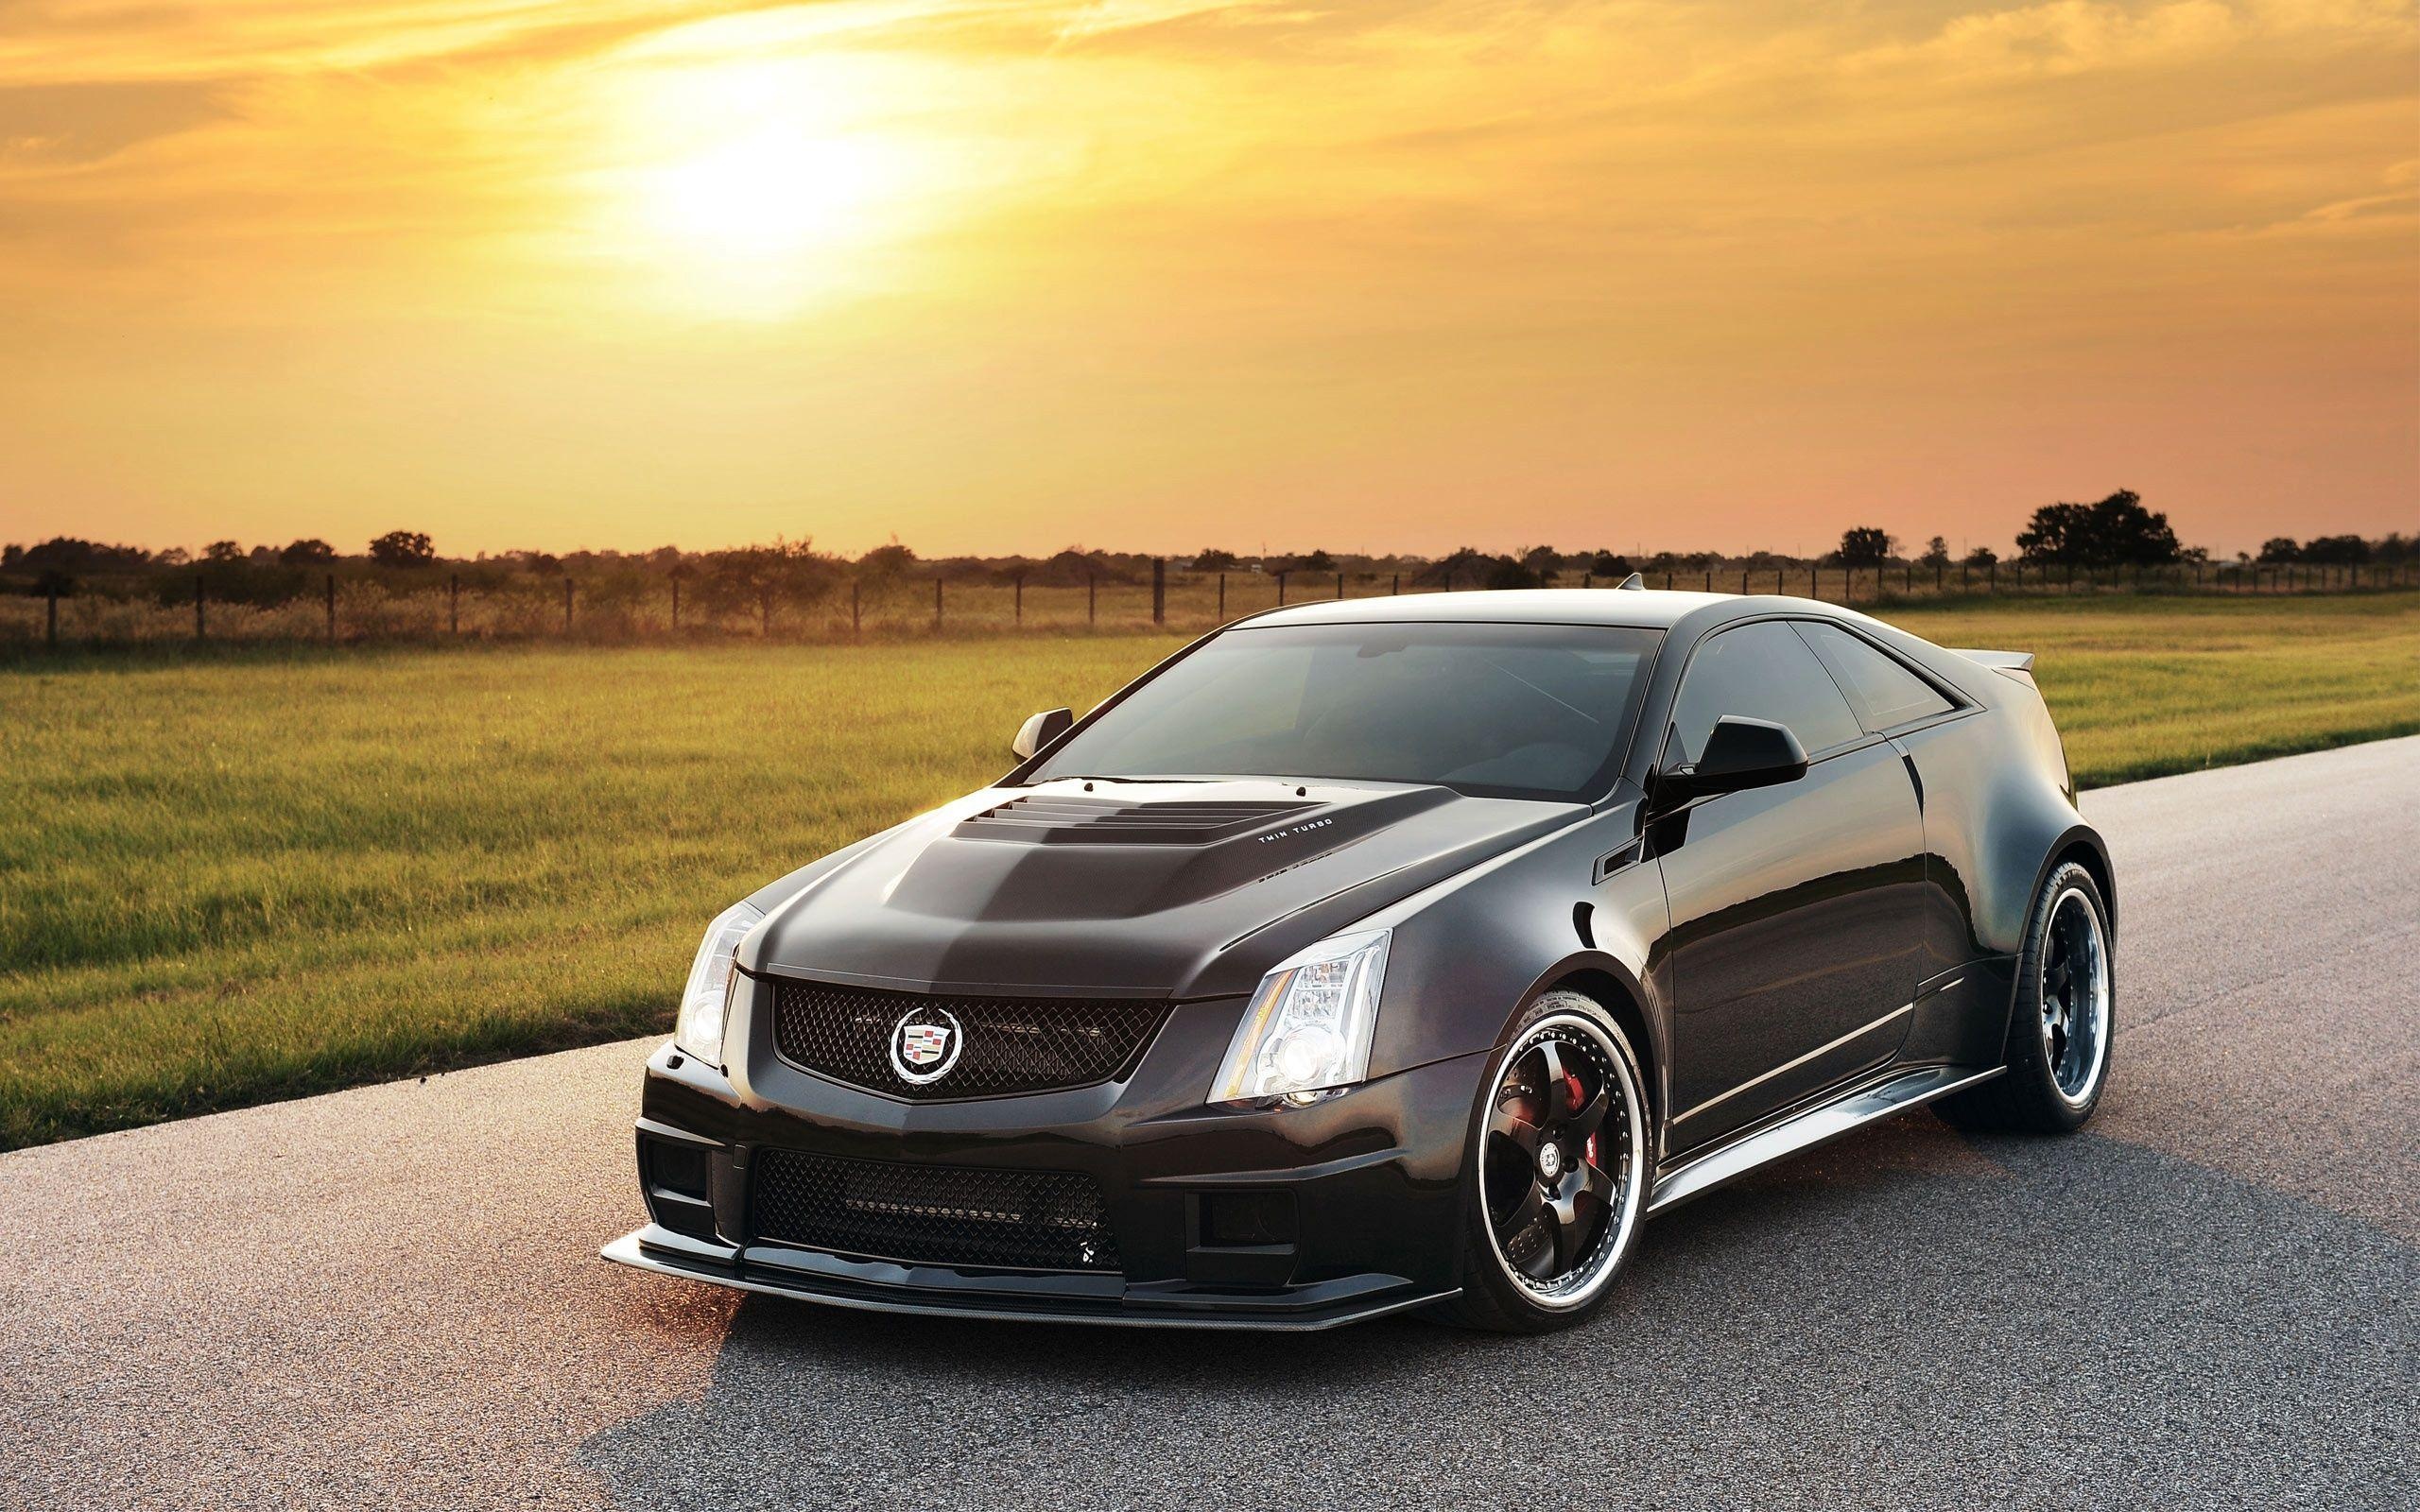 Cadillac Wallpapers, Car enthusiasts, High-quality images, Automotive art, 2560x1600 HD Desktop